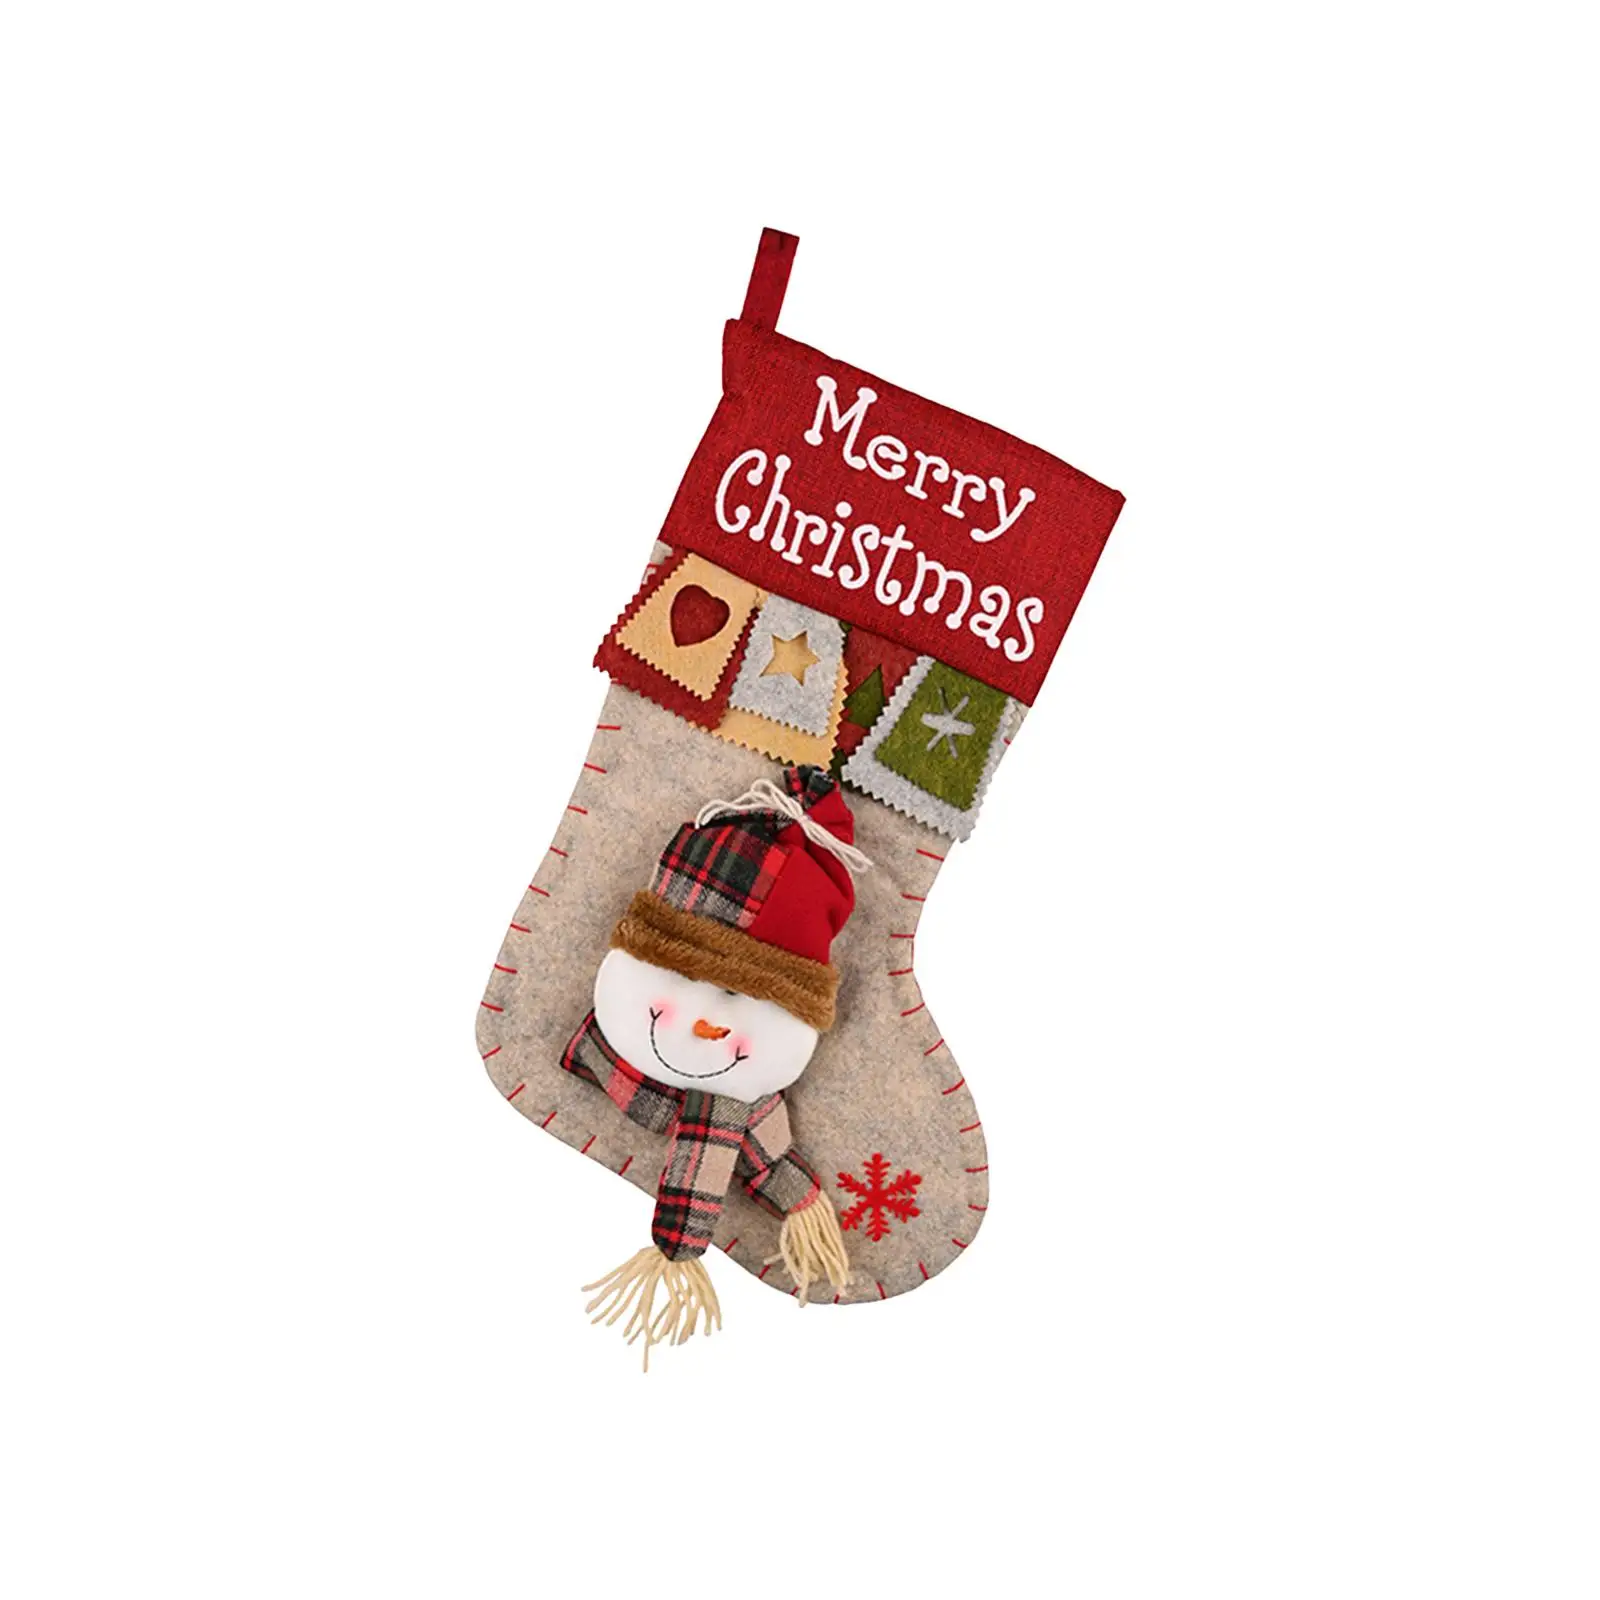 Christmas Stockings Christmas Ornament Portable Xmas Tree Decorations Holiday Stockings for Office Holiday Restaurant Home Baby